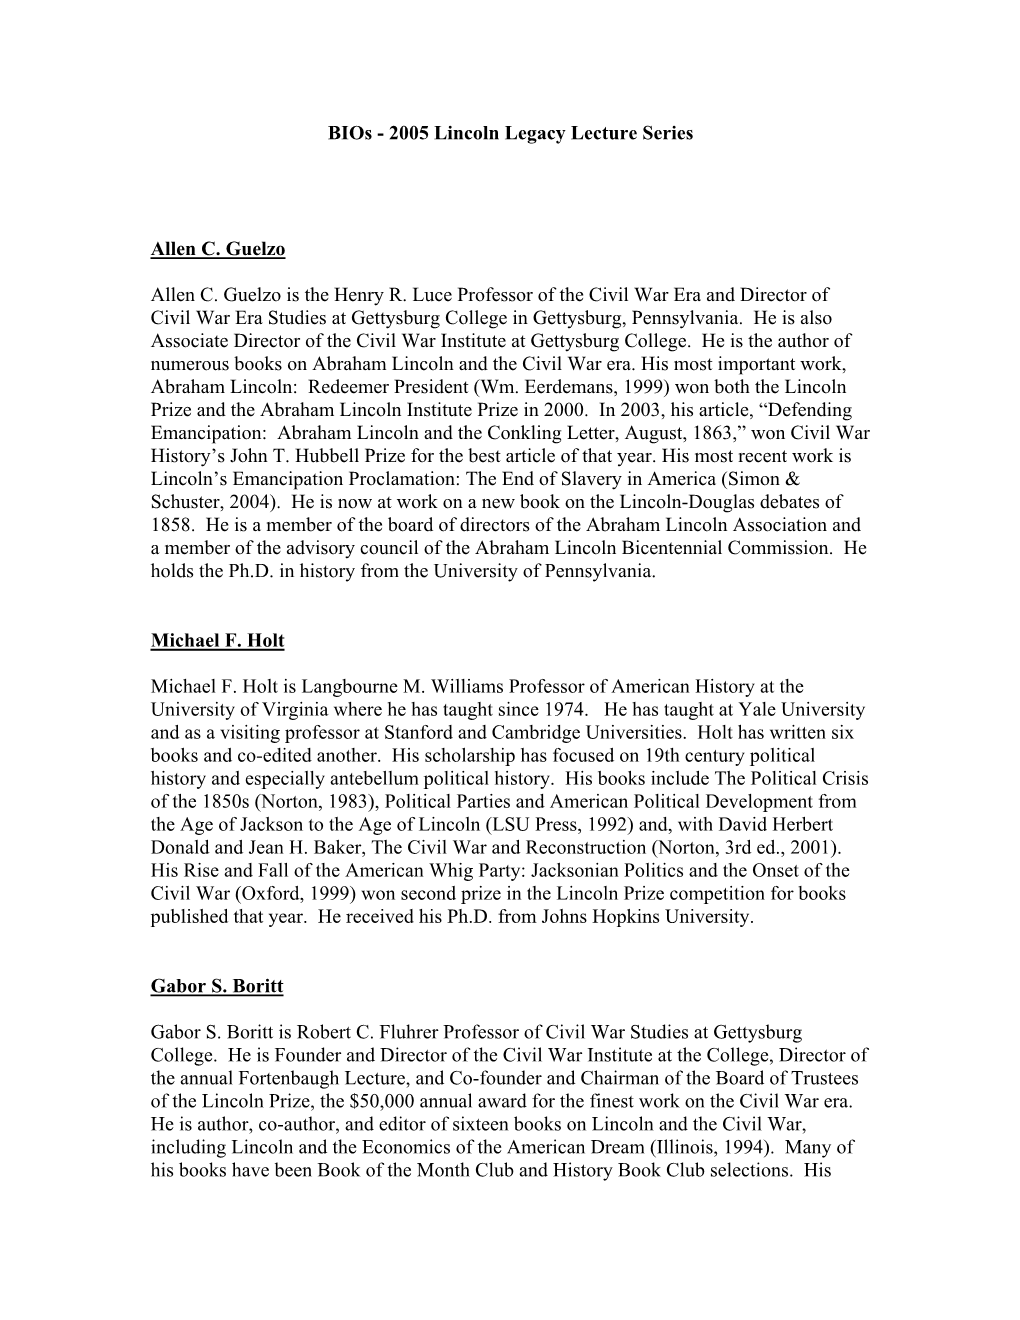 Bios for 2005 Lincoln Legacy Lecture Series Presenters